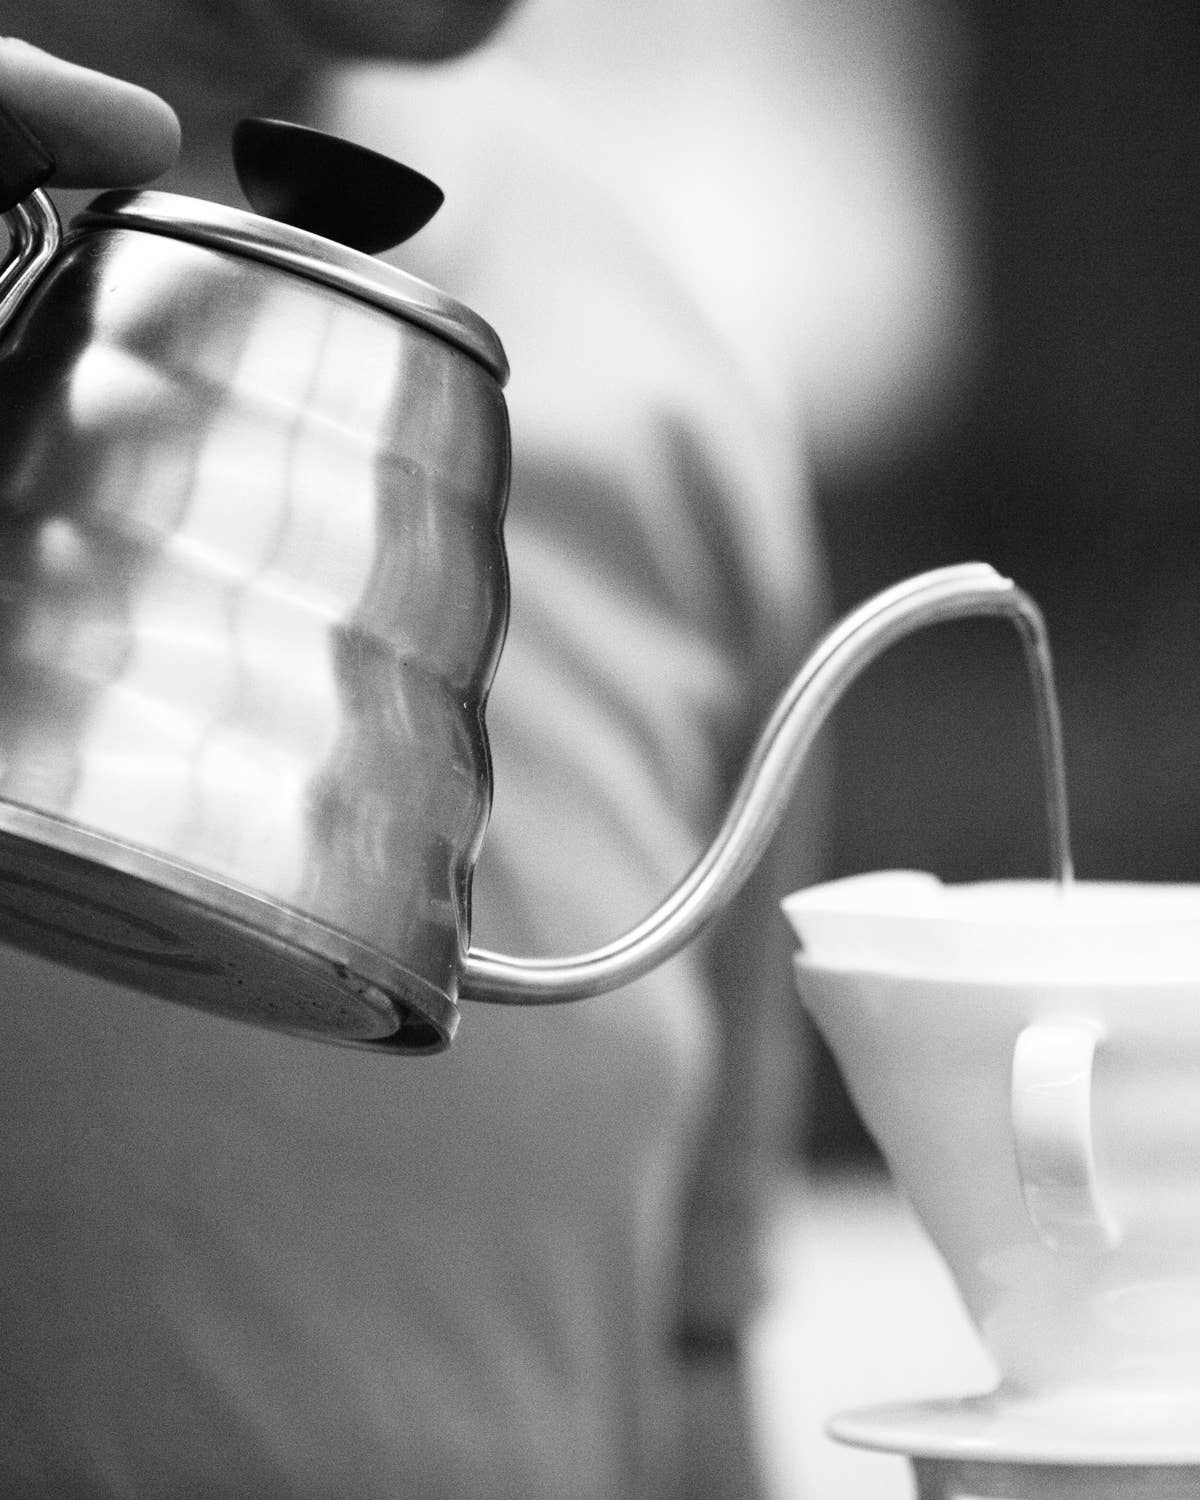 Eye Opener: Discovering Pour-over Coffee